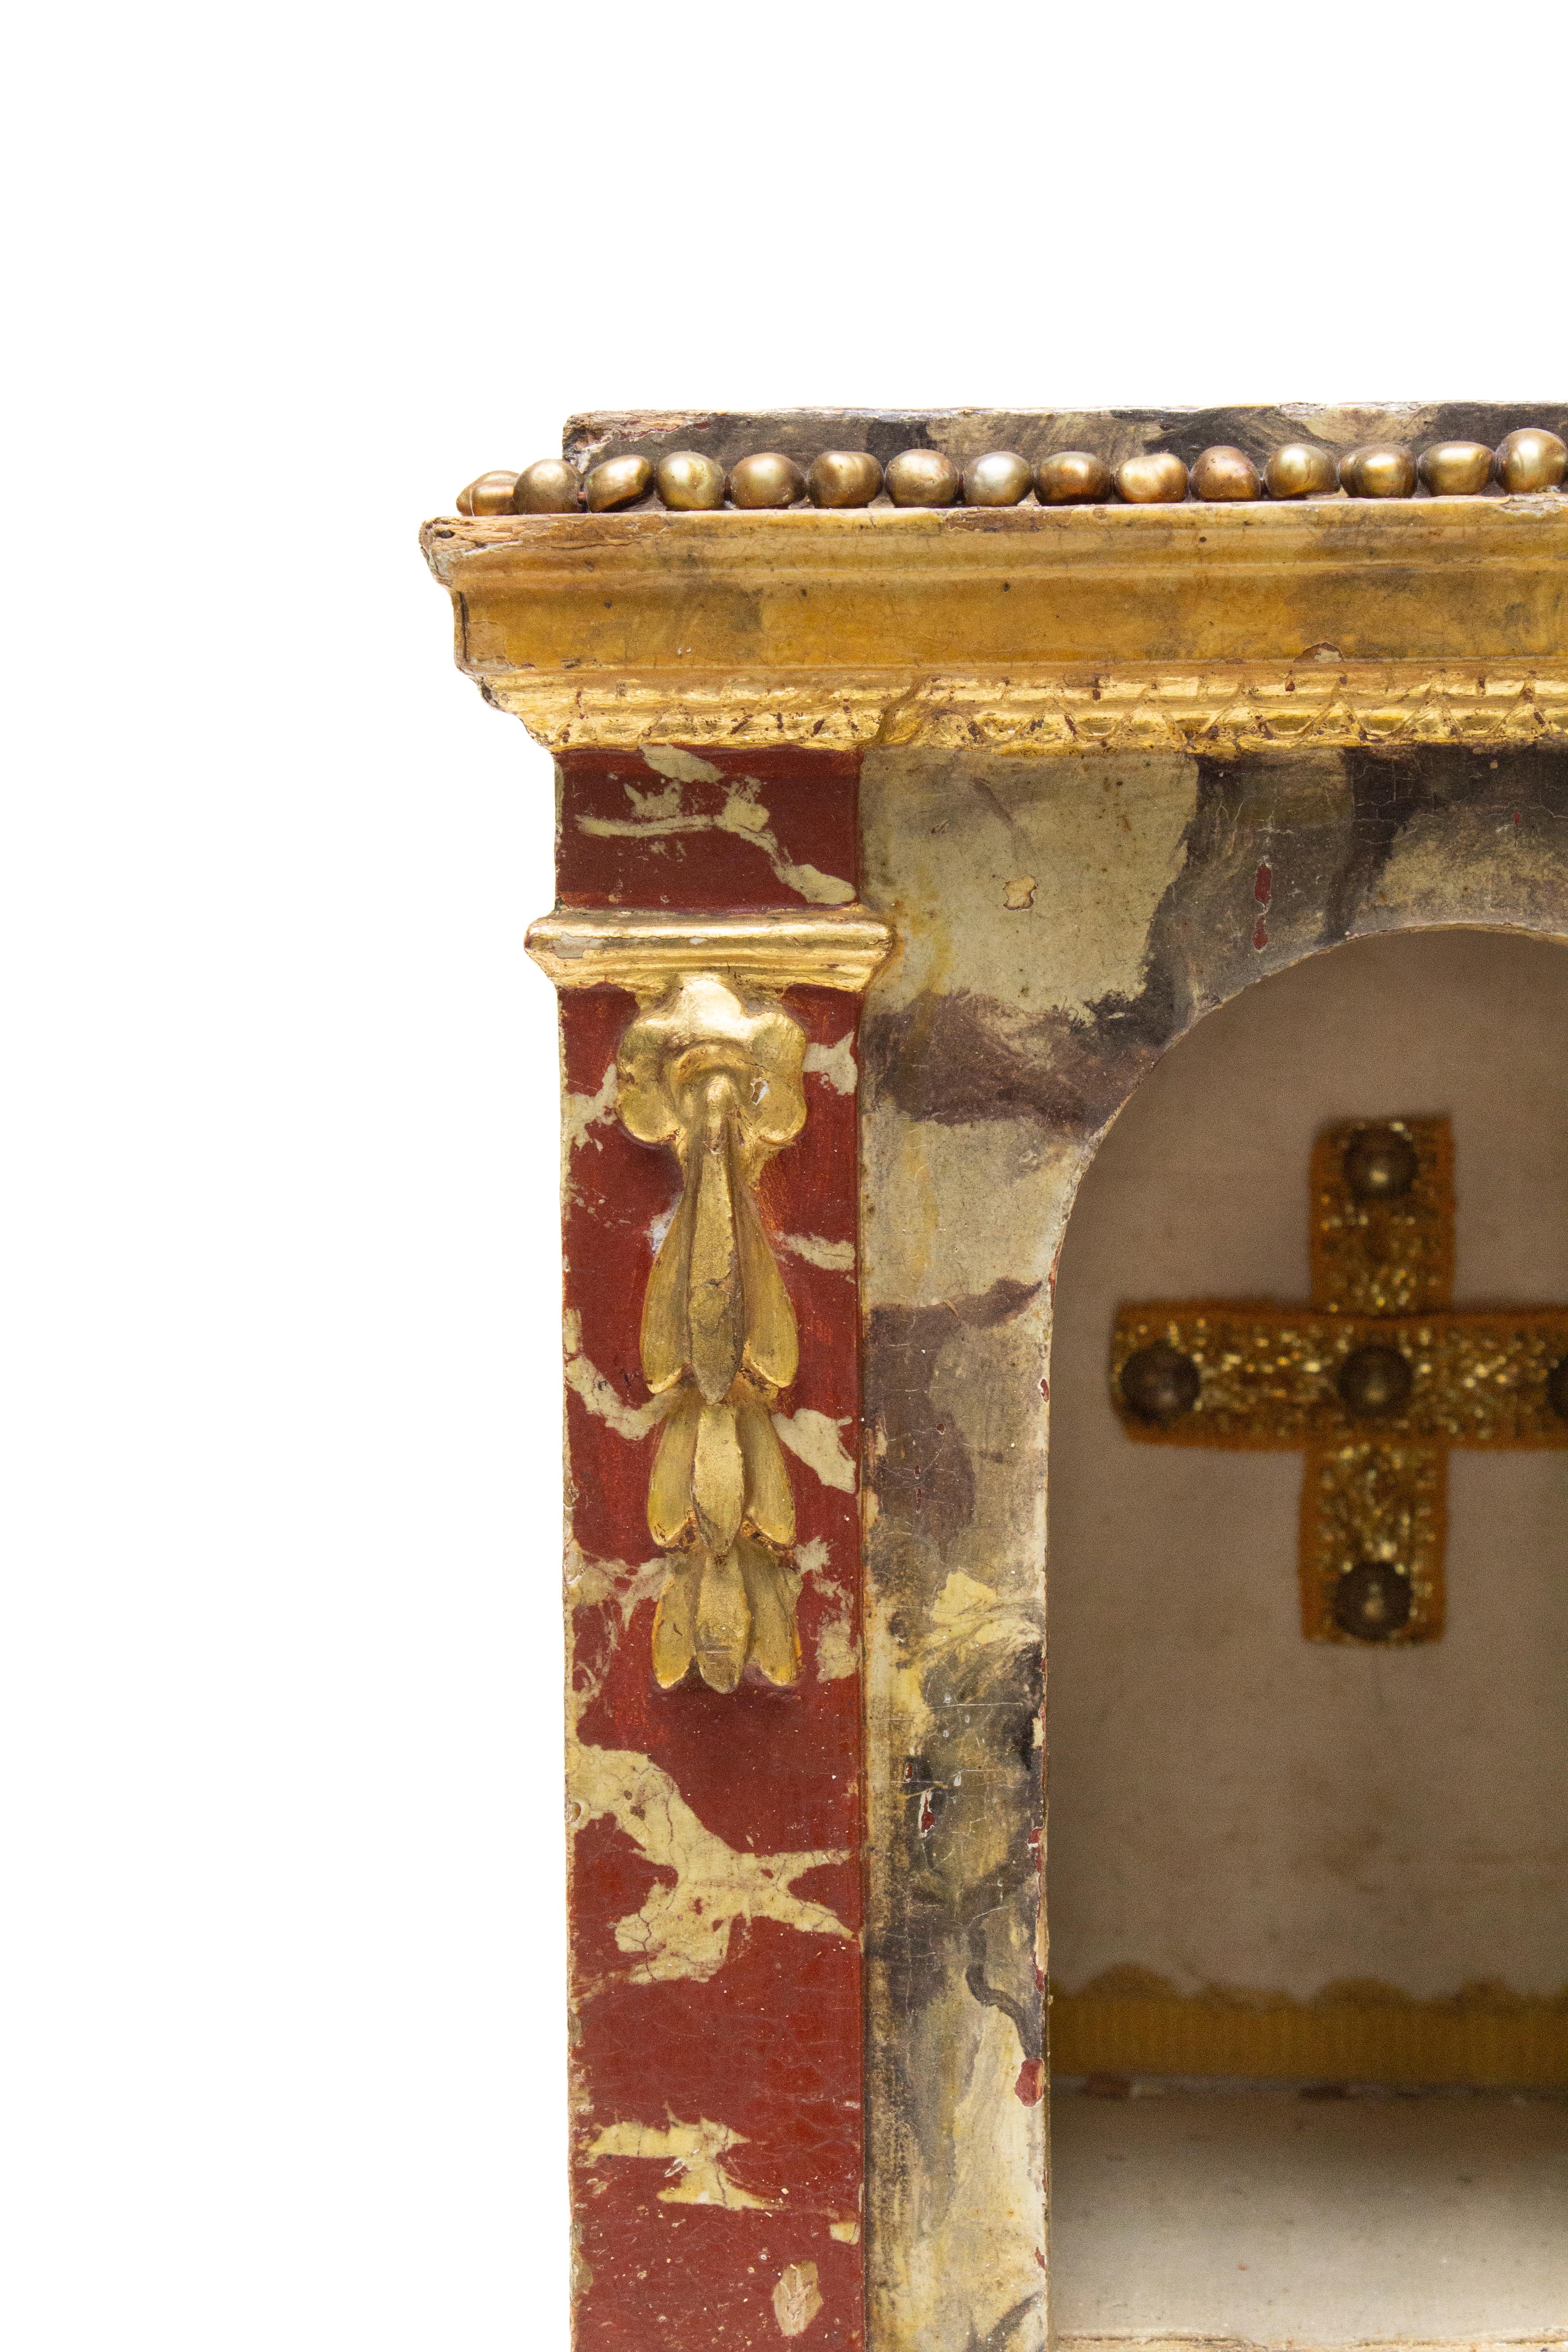 Gilt 18th Century Italian Ecclesiastical Tabernacle with Baroque Pearls